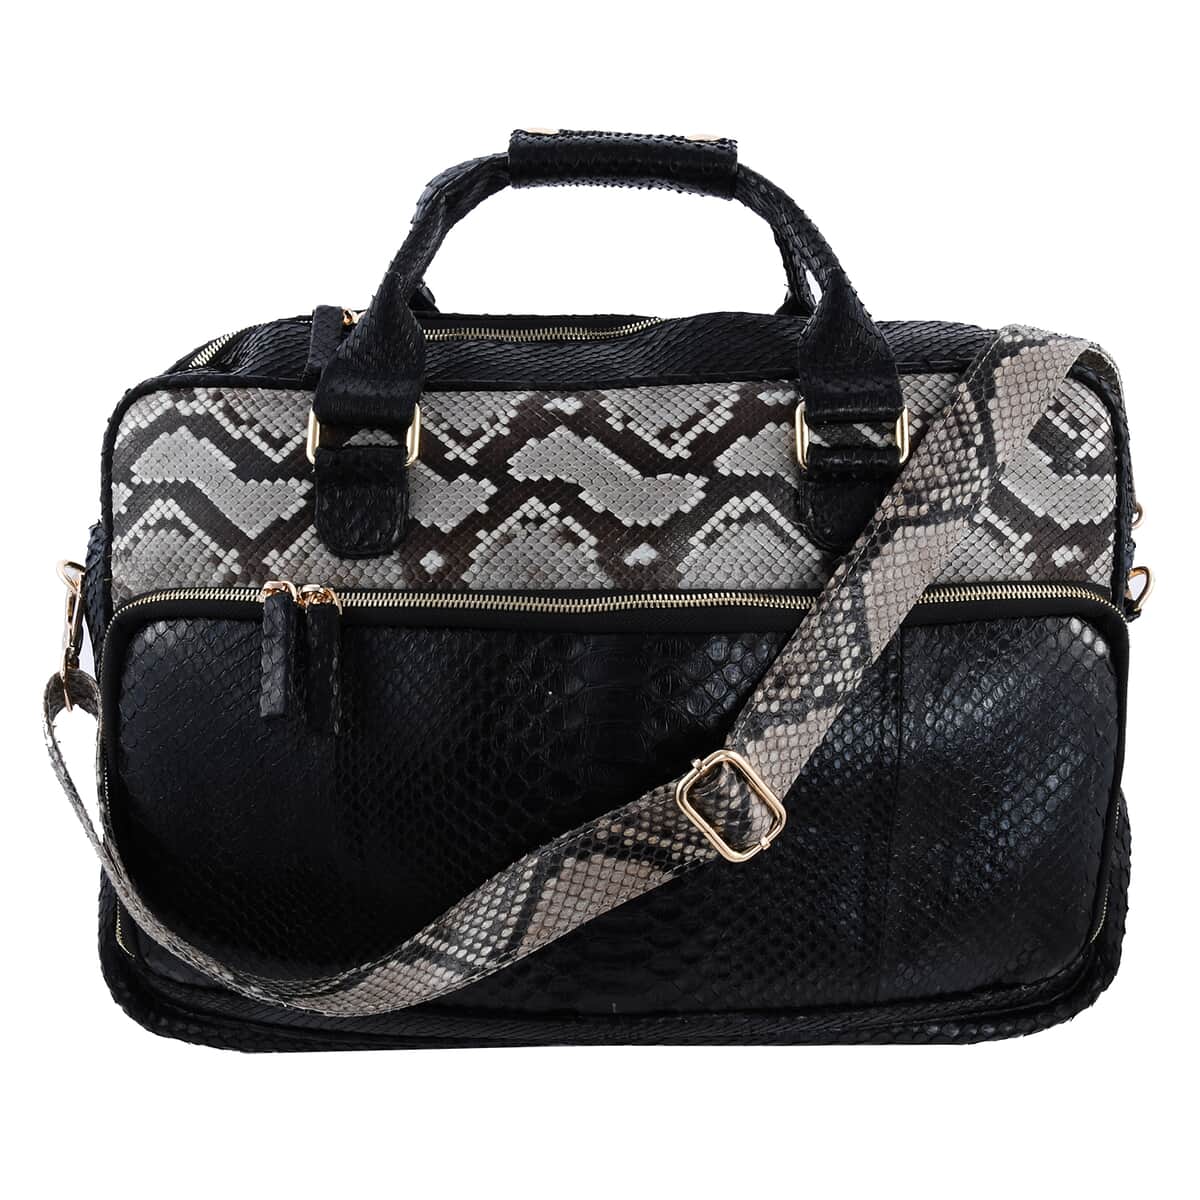 The Pelle Python Collection Handmade 100% Genuine Python Leather Black with Natural Color Laptop Bag (15.5"x12"x3.5") image number 0